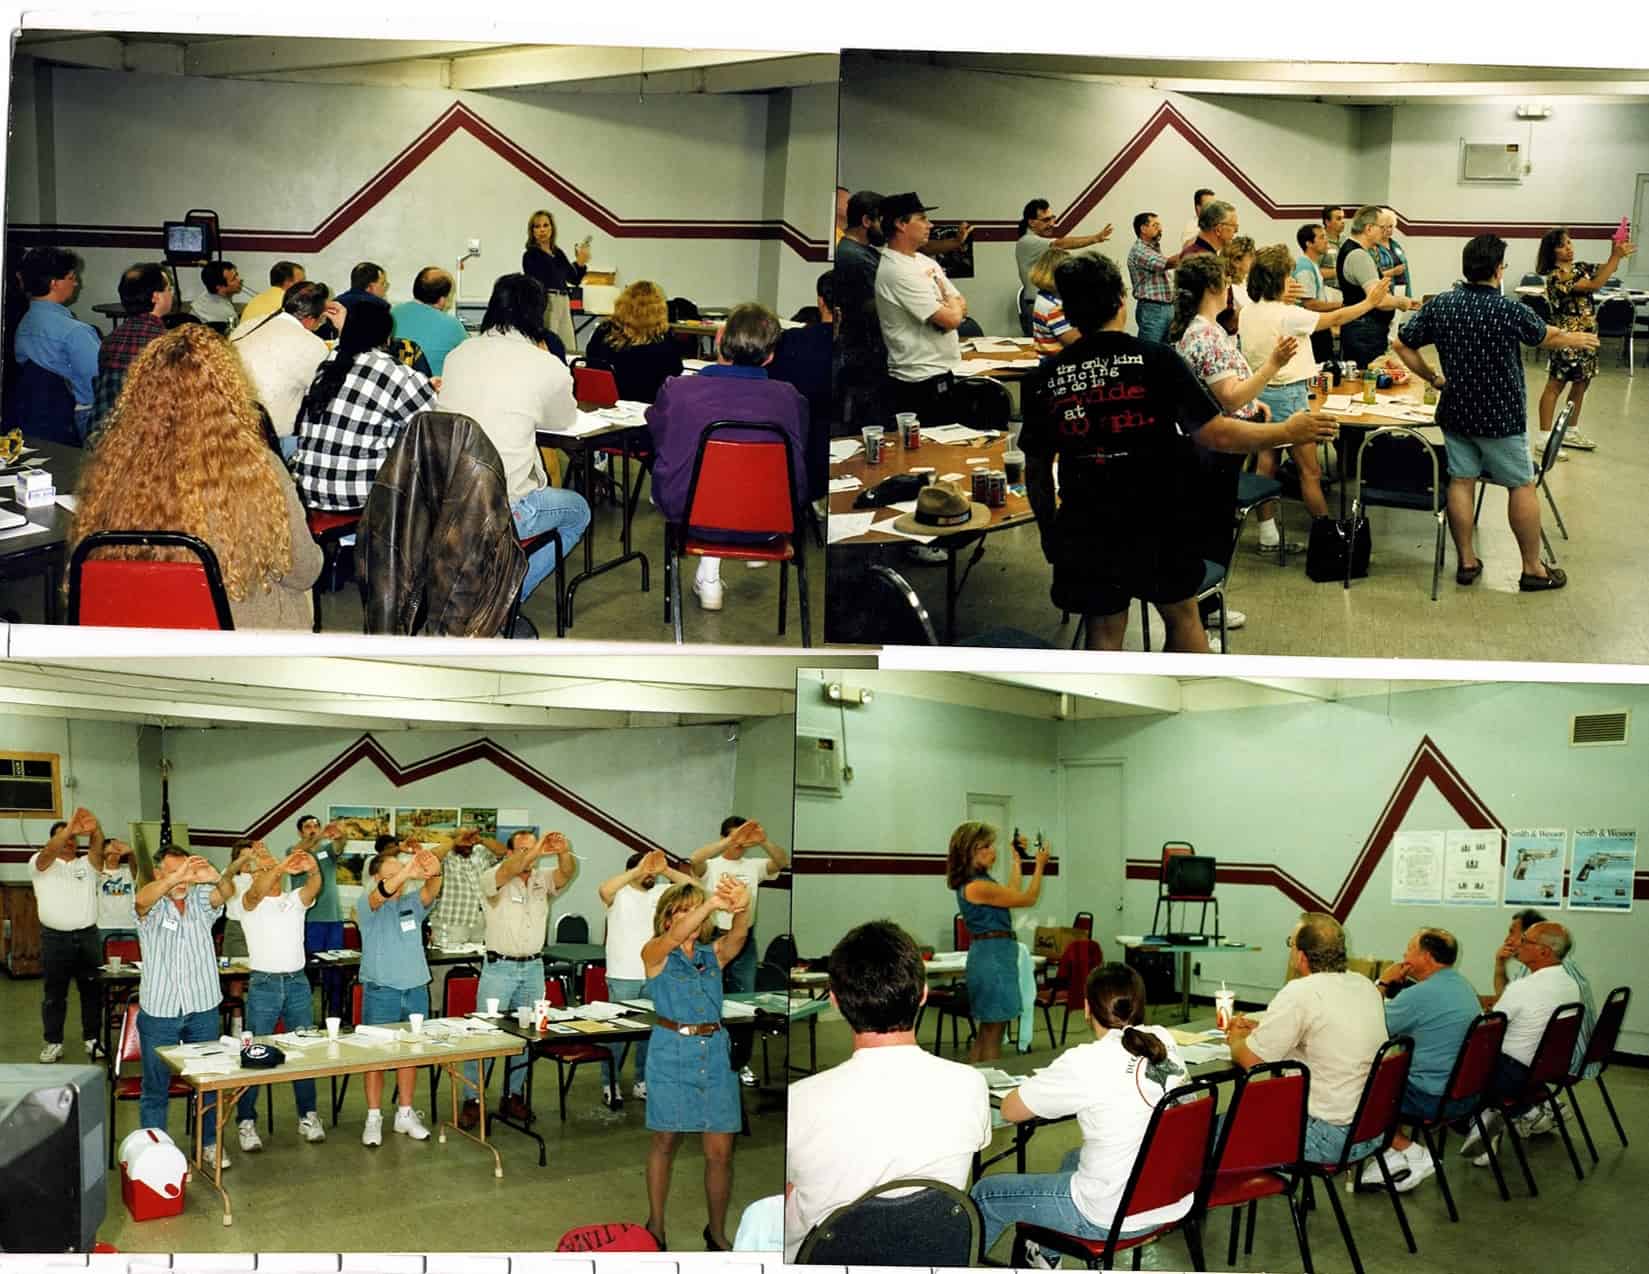 Mary Instructing one of Michigan’s First, Iconic, trend-setting CPL/CCW Courses on location of which she helped influence the passage of this State Law, as the First and only Michigan Female NRA Certified CPL Instructor way back in 2001.